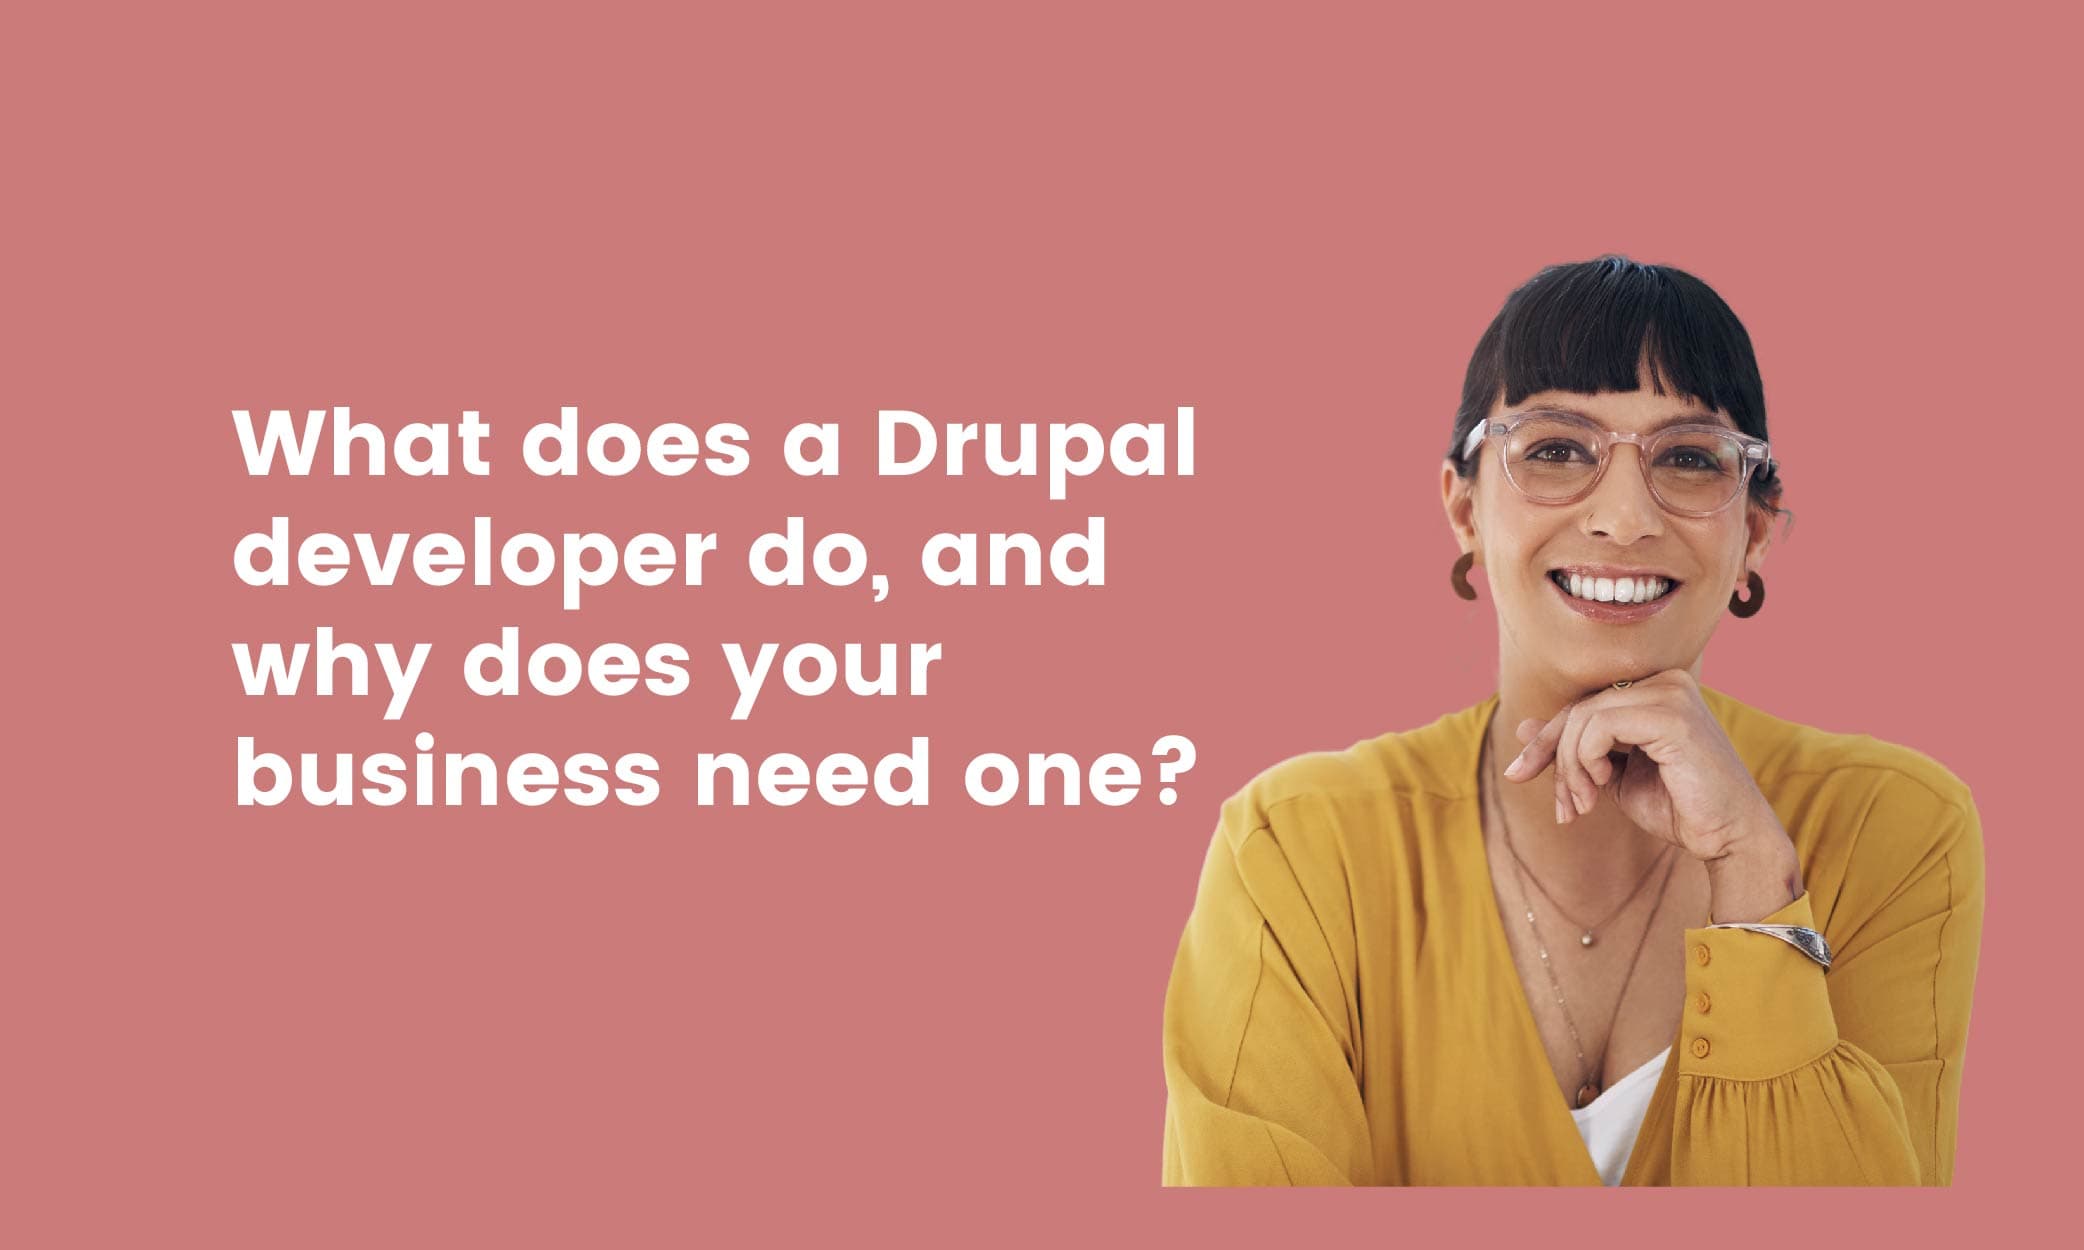 what does a drupal developer do and why your business needs one